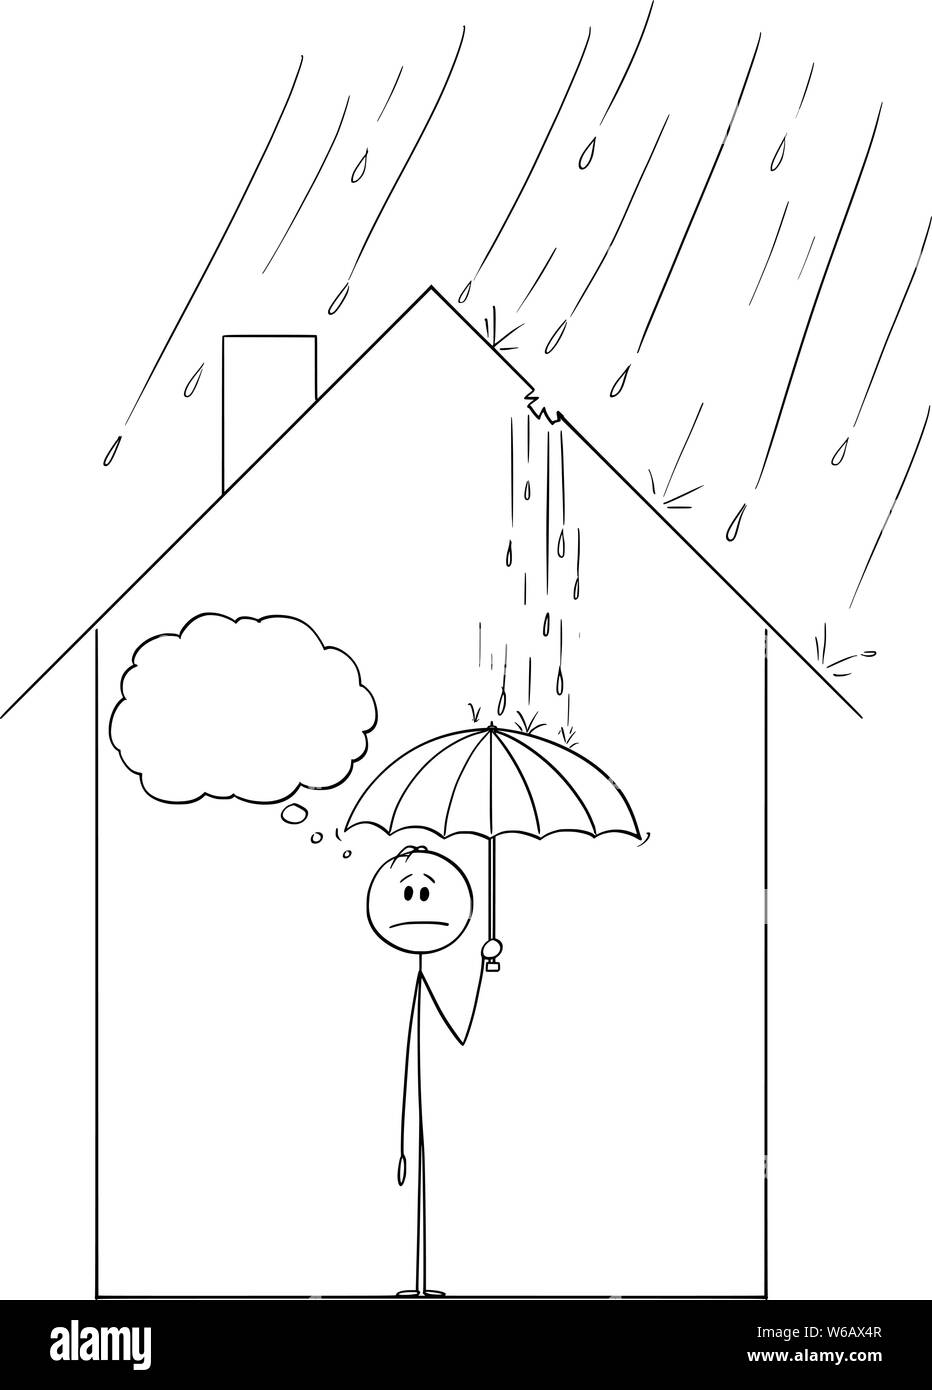 Vector cartoon stick figure drawing conceptual illustration of frustrated man holding umbrella inside his family house, because rain is coming through the hole in roof. Stock Vector